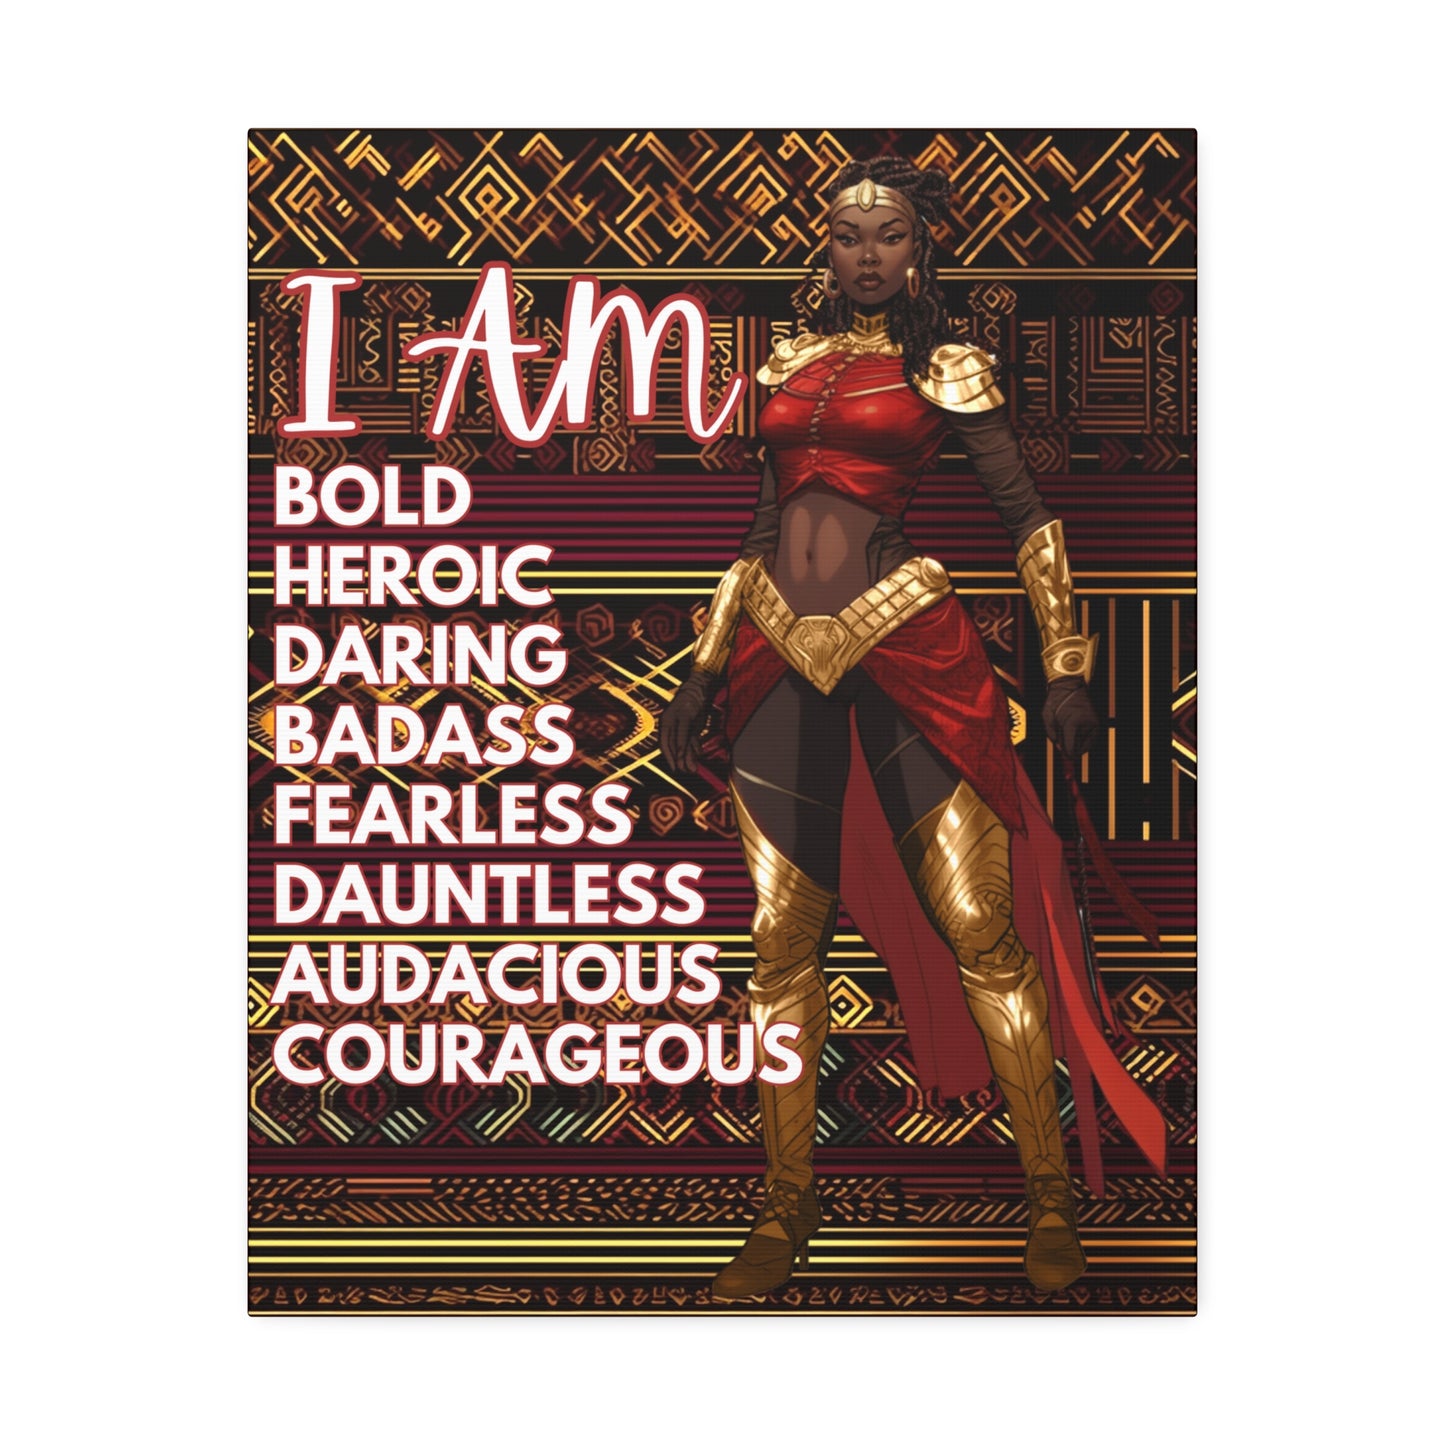 “Bold” BADASS WARRIOR WOMAN | Canvas Stretched, 1.5 | Affirmations Accessories